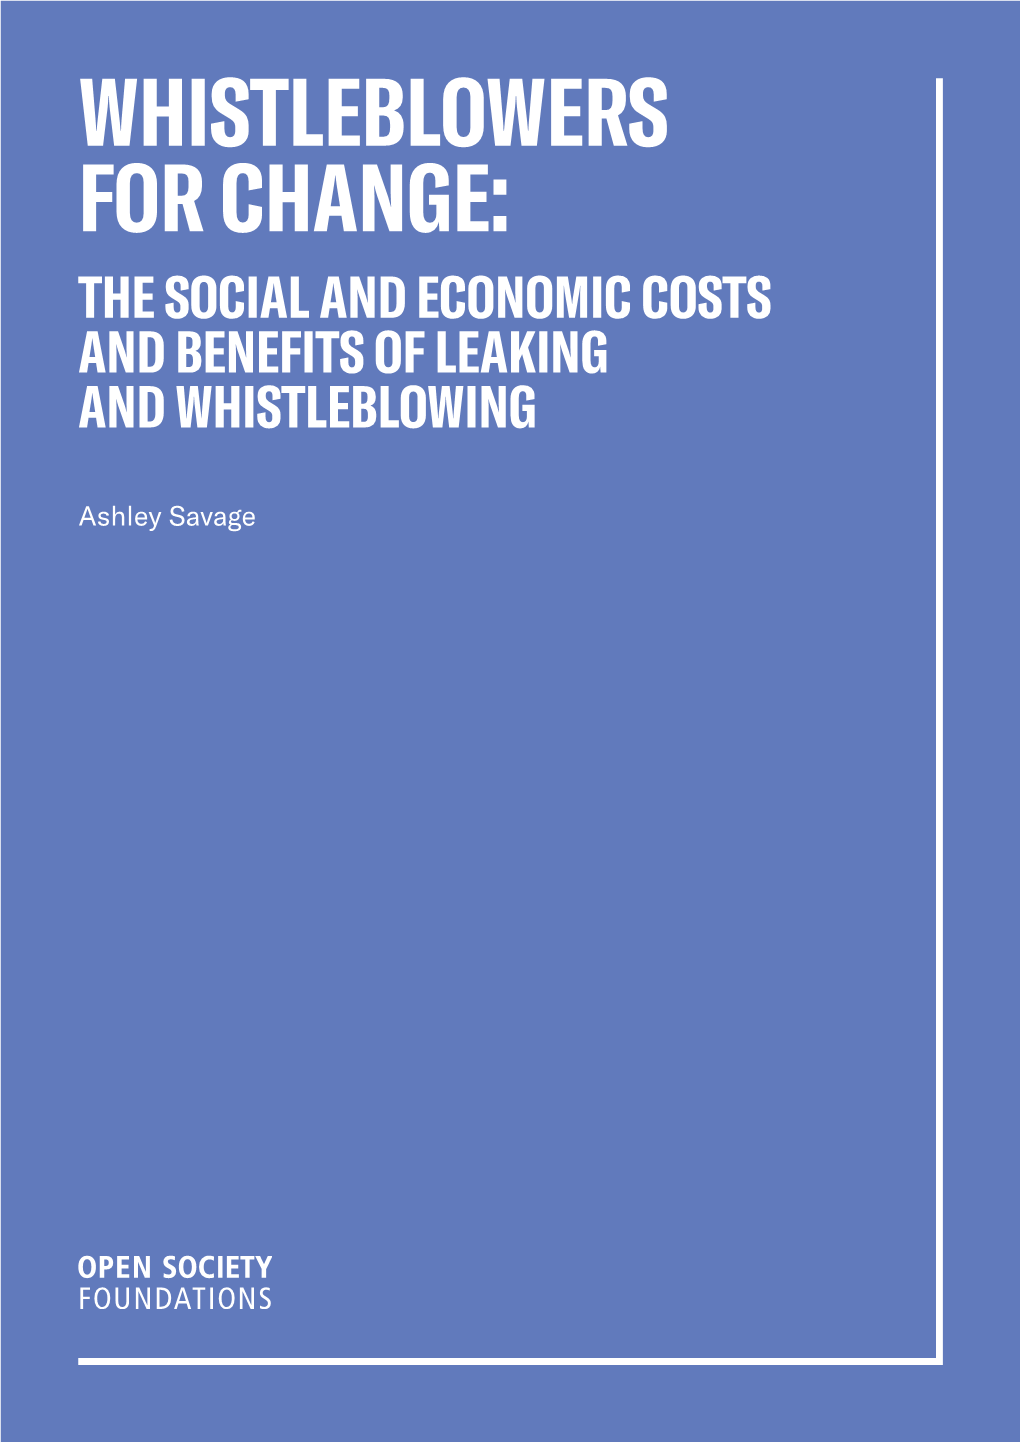 Whistleblowers for Change: the Social and Economic Costs and Benefits of Leaking and Whistleblowing